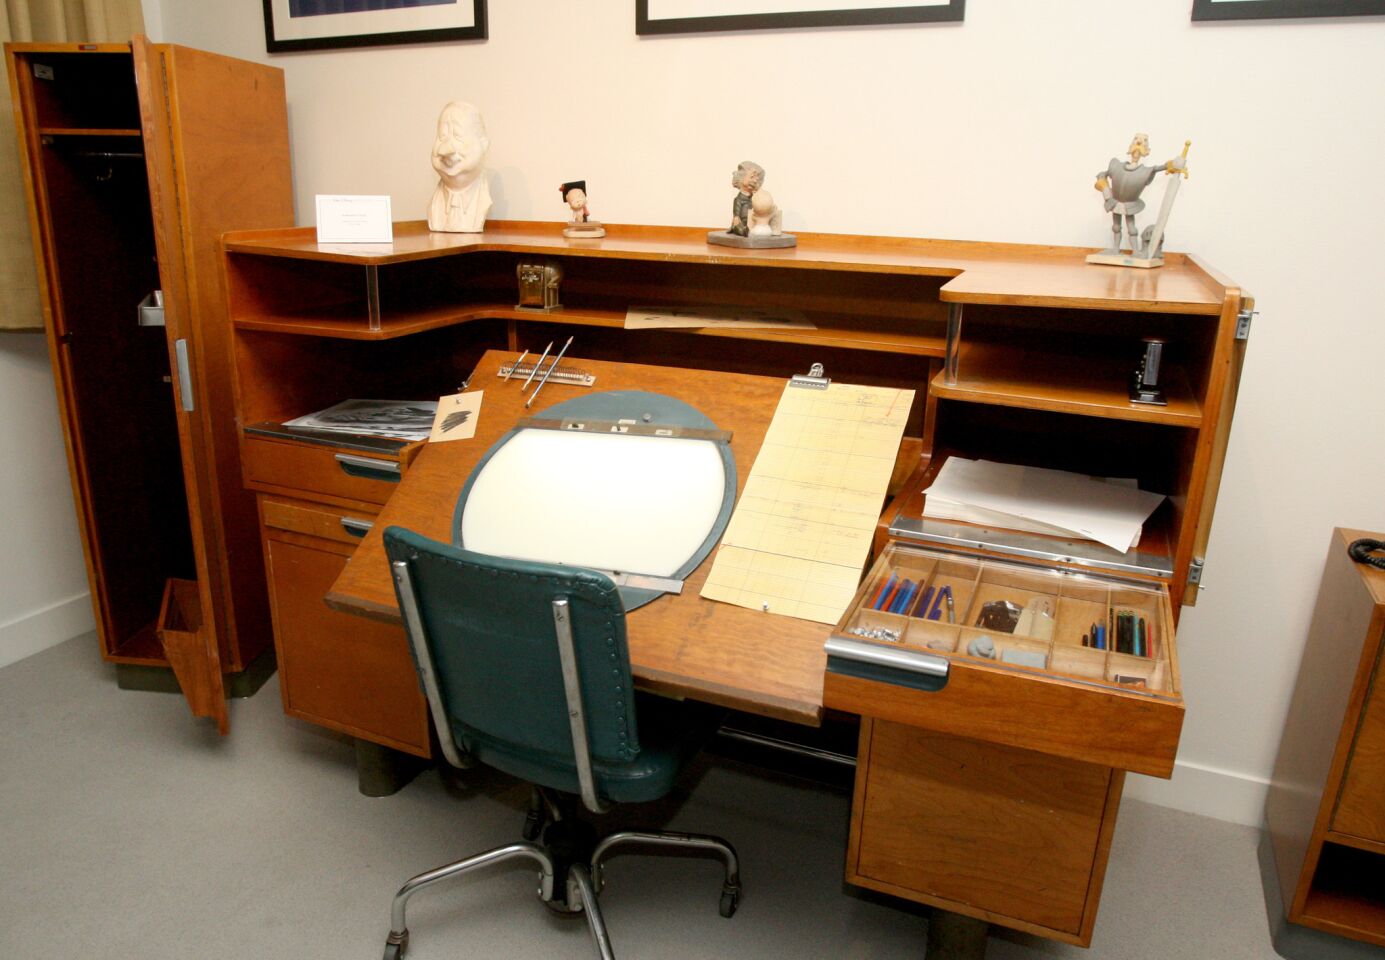 To celebrate the 75th anniversary of the Walt Disney Studios in Burbank, the Walt Disney Archives restored Walt Disney's original office suite, which was shown to members of the media on Tuesday, December 22, 2015. A smaller third office contains an original artist's desk. The space is located in the original Animation building and was occupied by Walt Disney from 1940 to 1966, when he passed away at the age of 65 from lung cancer. The permanent exhibit will be opened to Disney employees, cast members and studio visitors and it will be added to tours of the studio lot that gold members of the official fan club, D23, can take.